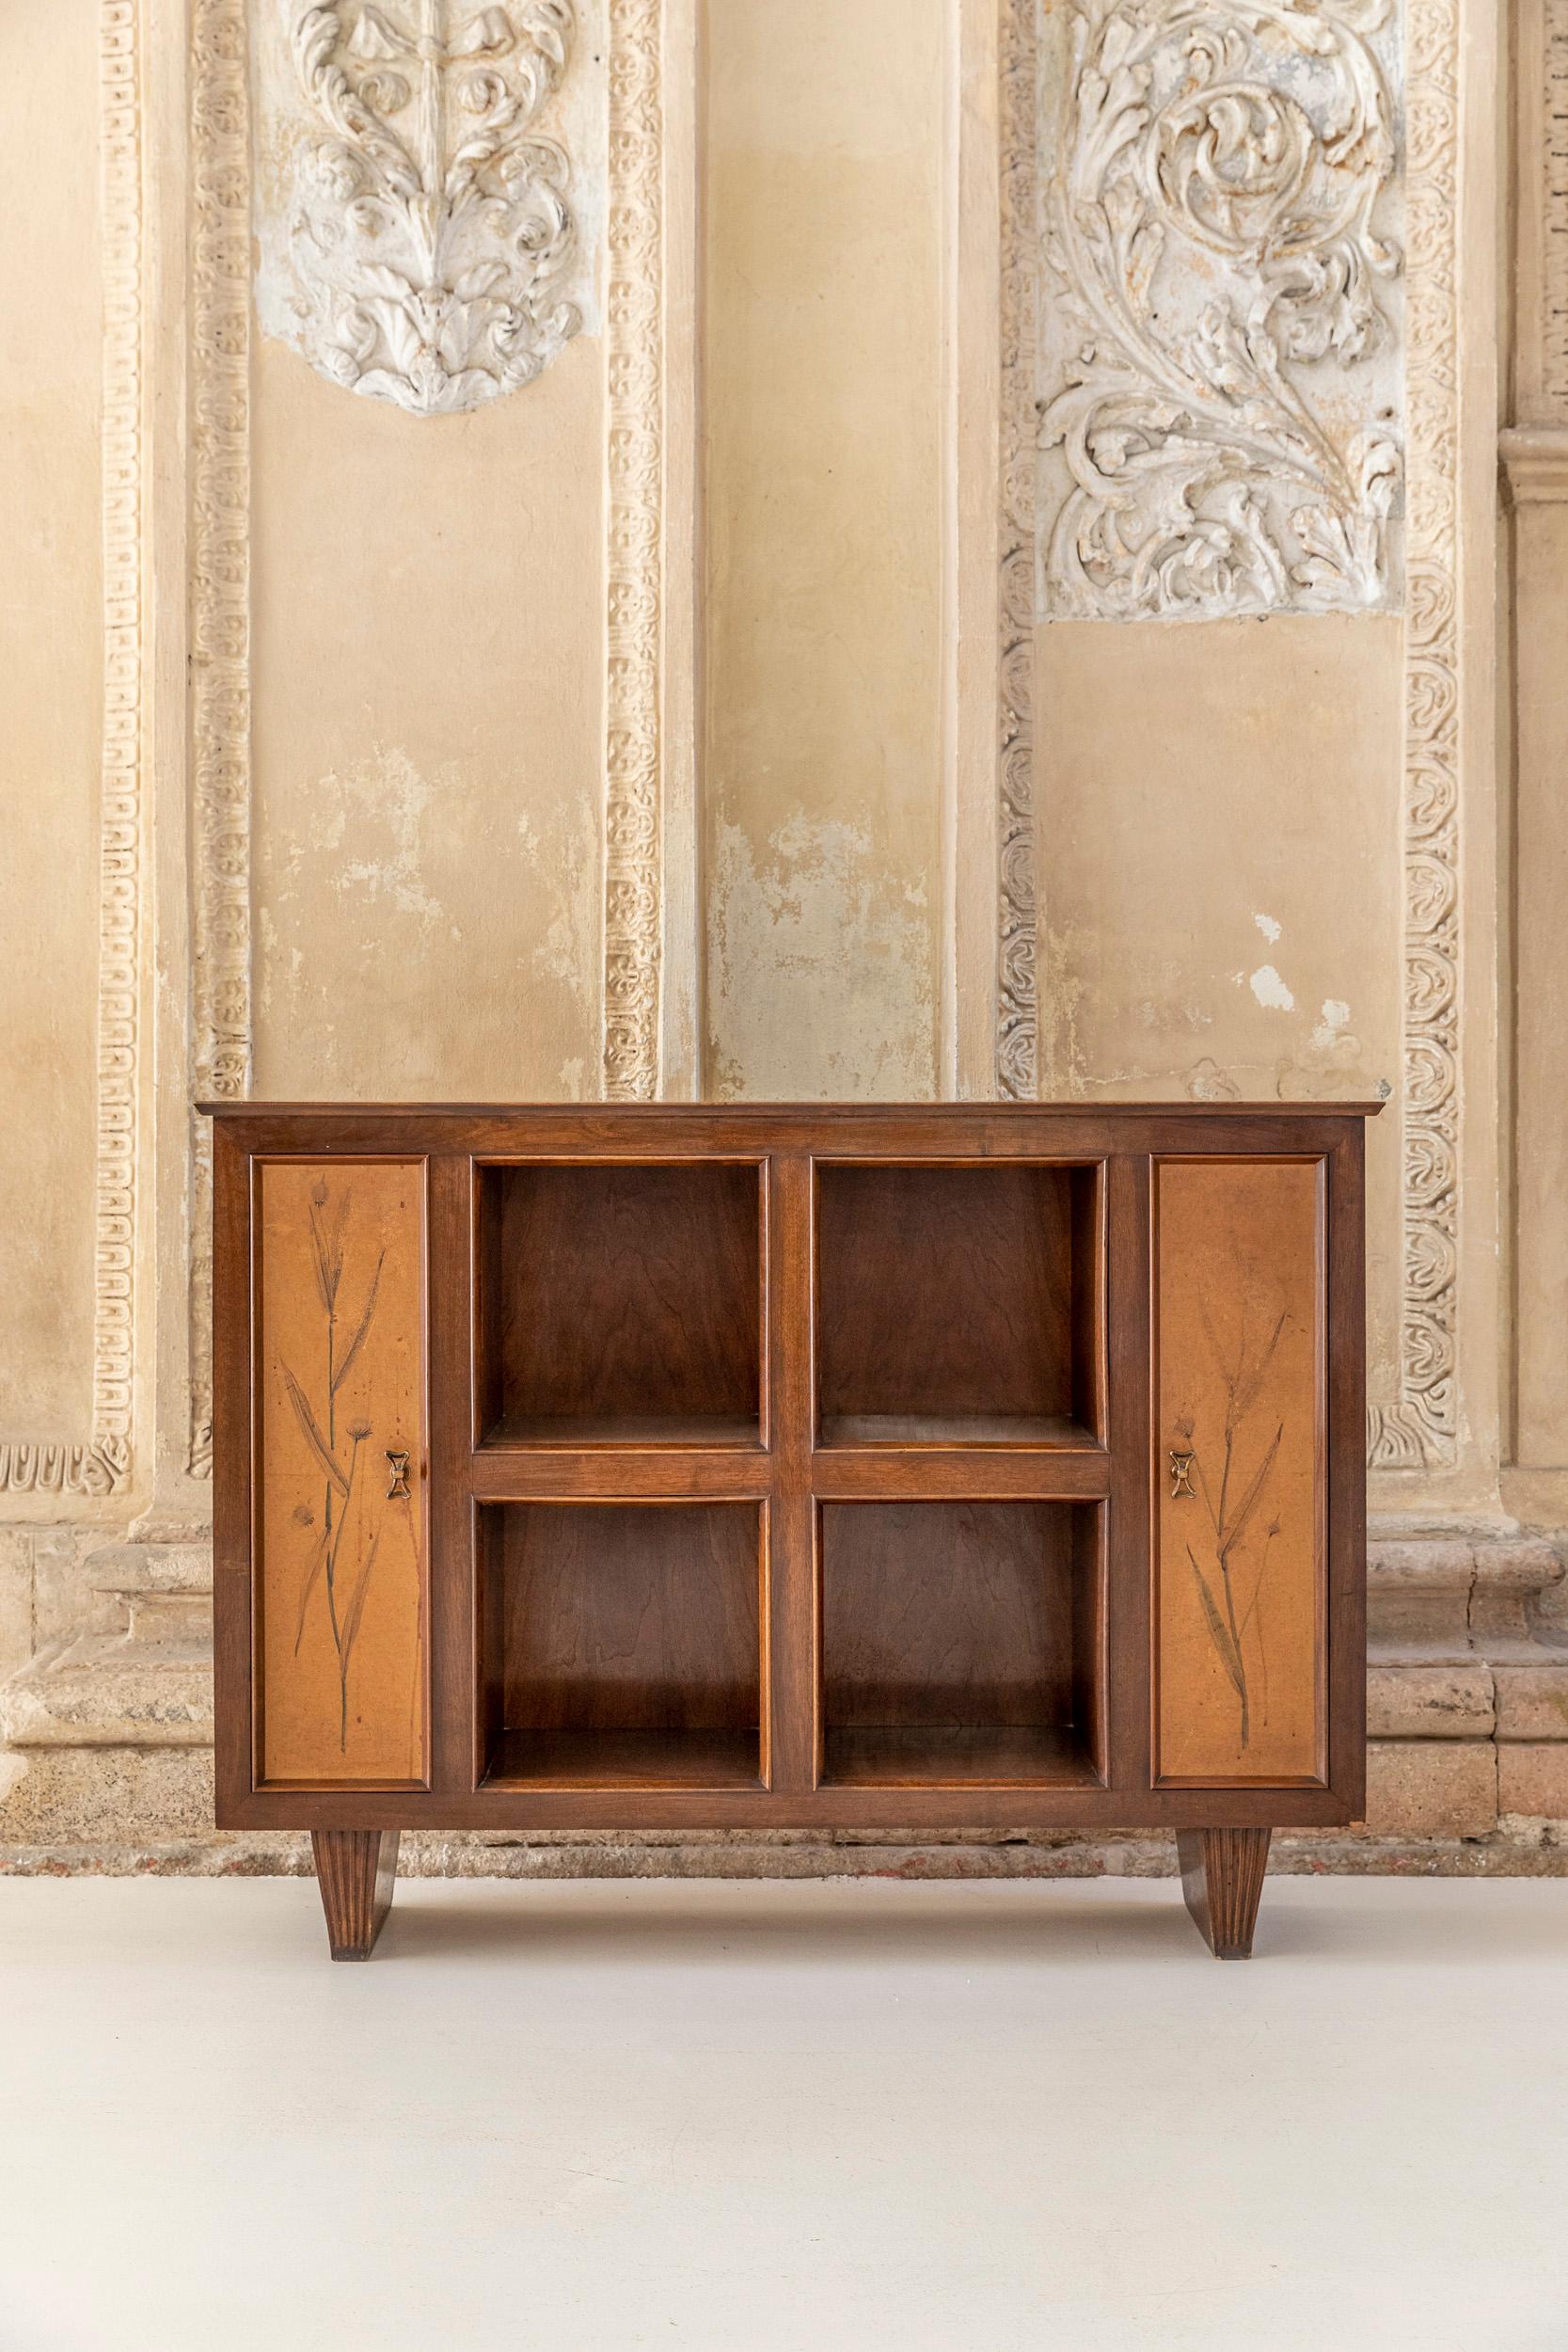 Walnut cabinet or sideboard attributed to Osvaldo Borsani. 
This sideboard has four central square compartments and two side doors, each of which has inside tree shelves. Hand painted parchment doors and sides.
Peculiarity of this item are the